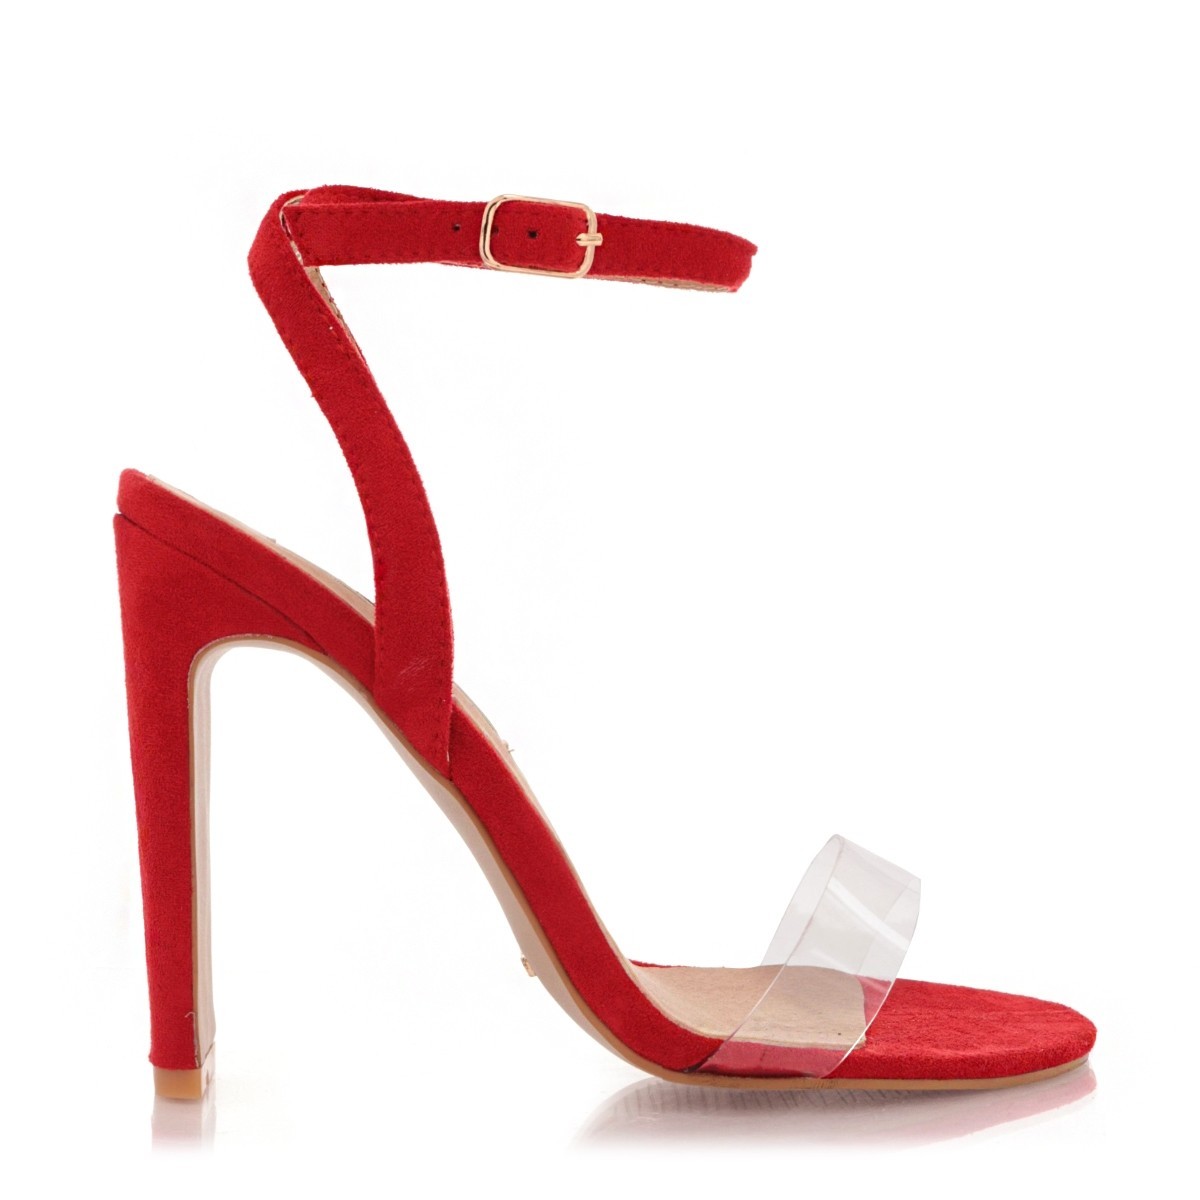 Delphine Red Suede by Billini Shoes on Sale | ShoeSales